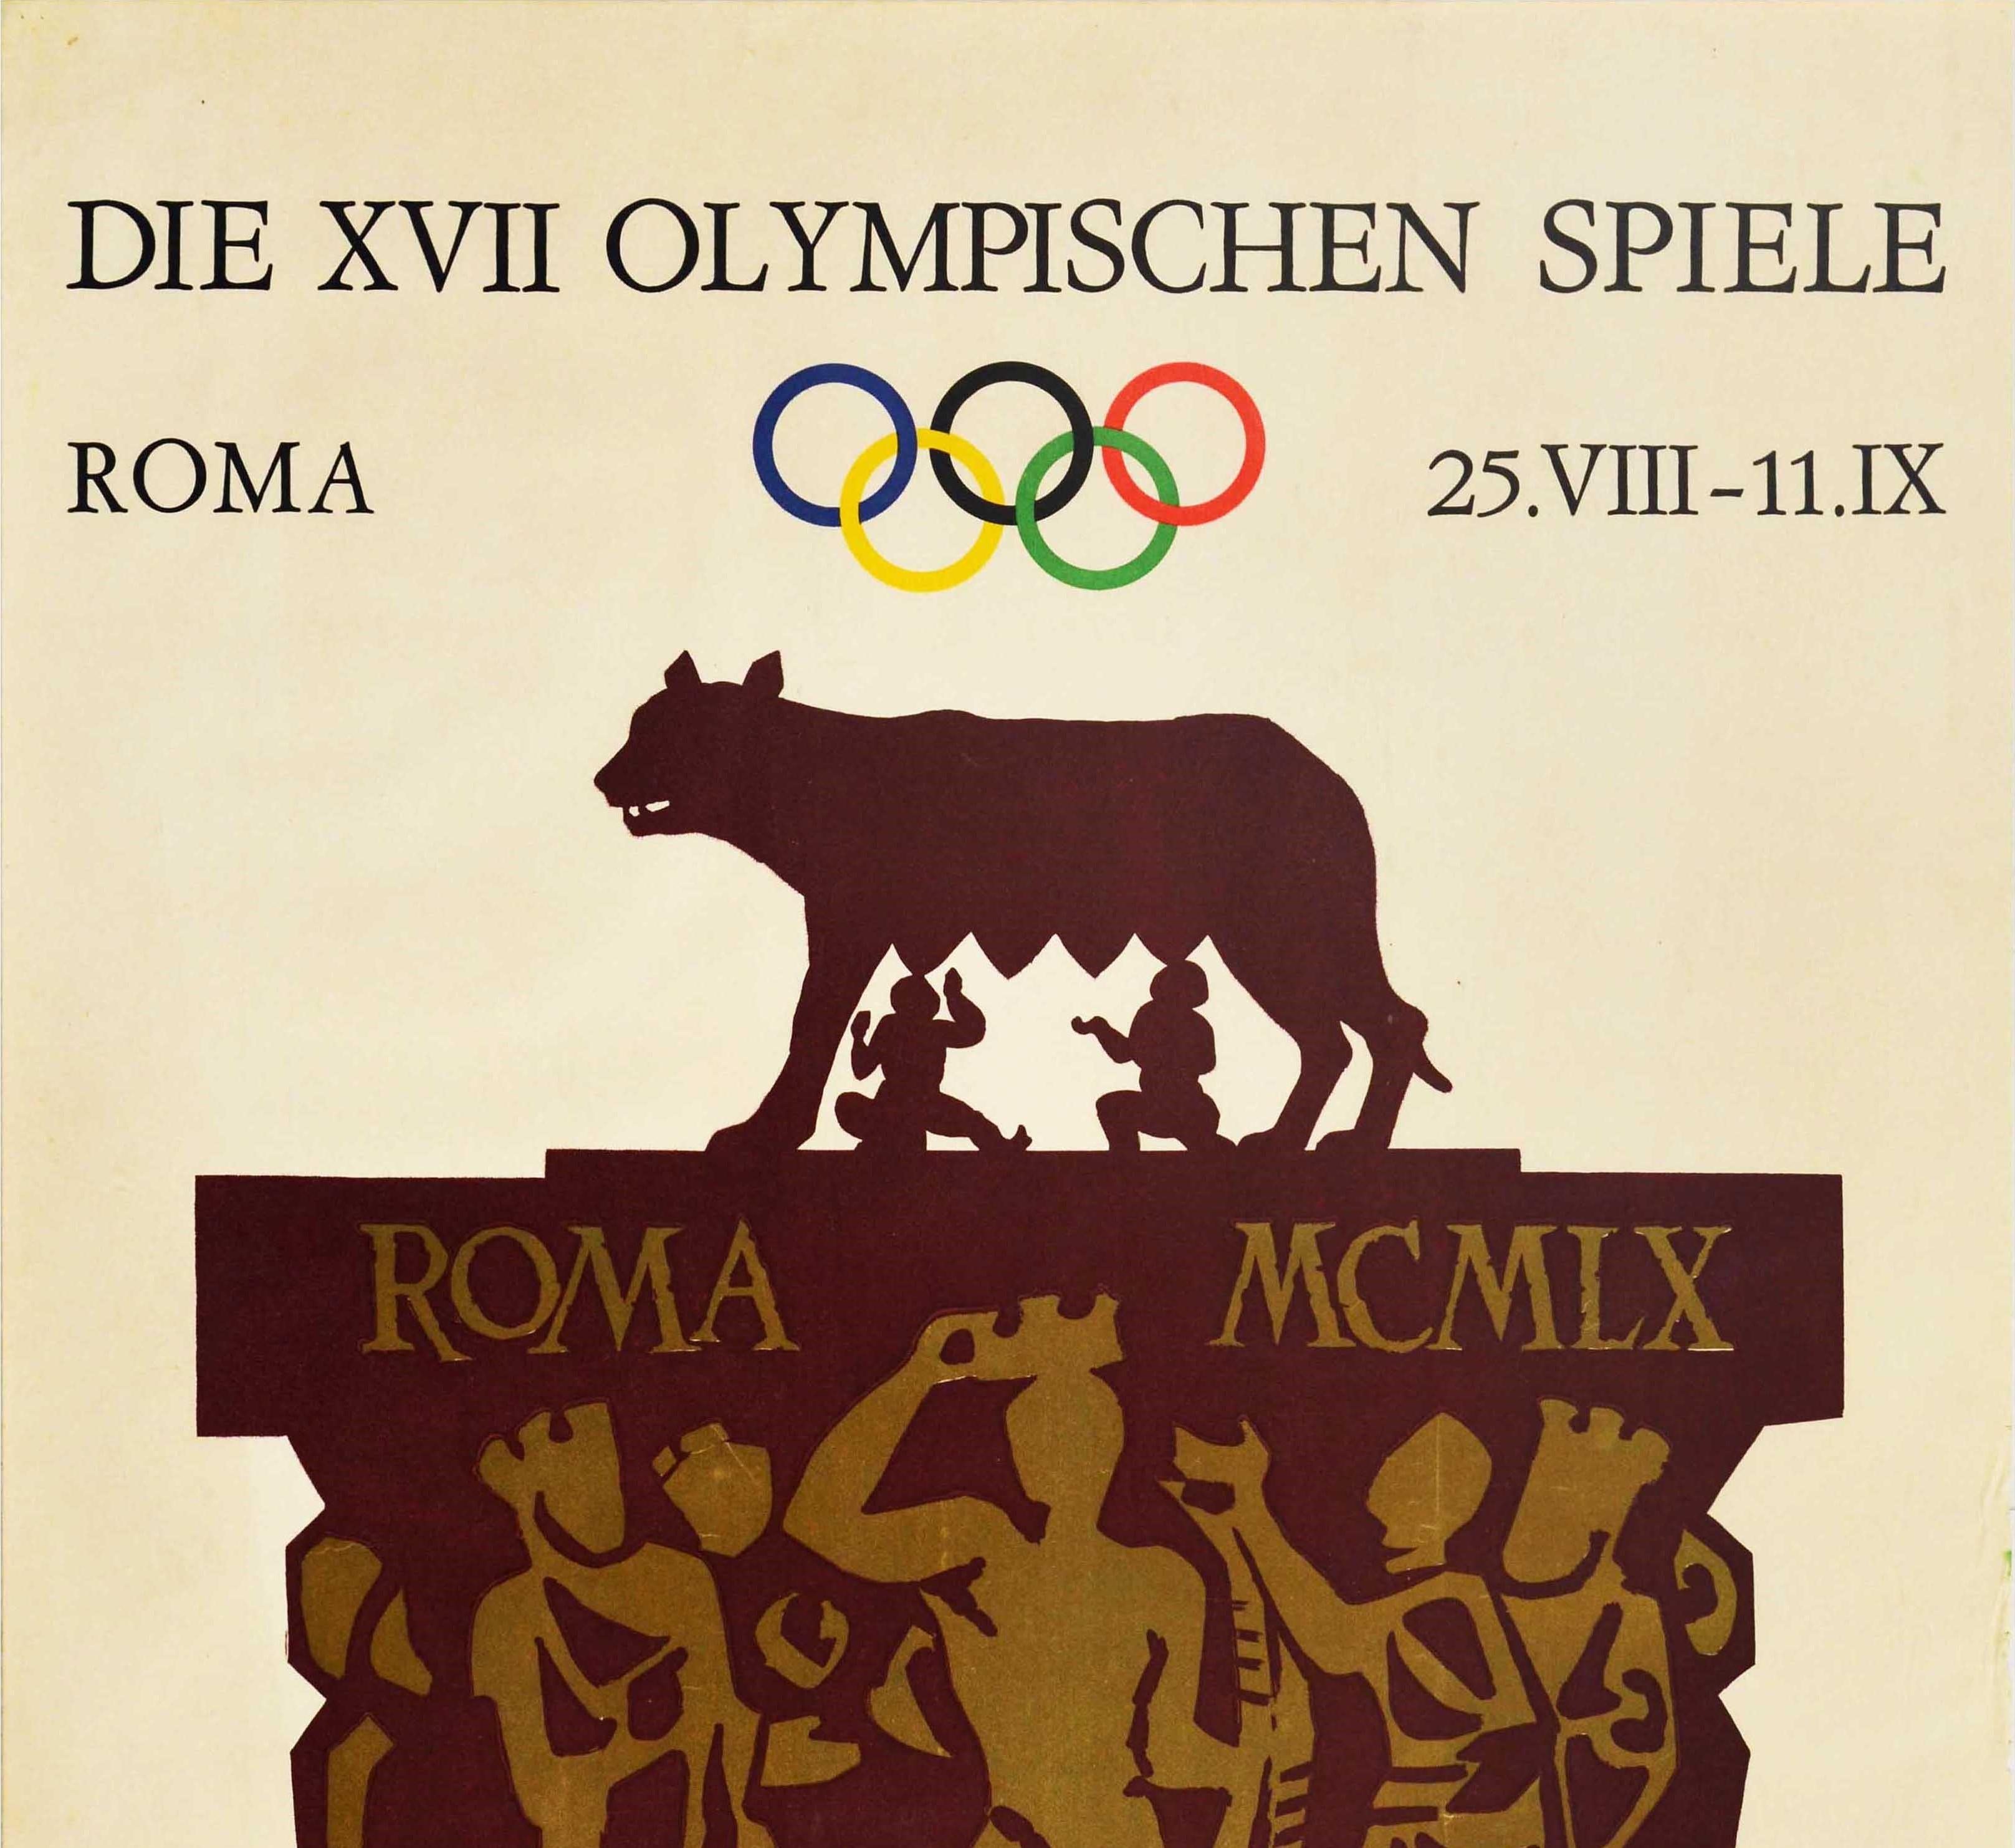 Original vintage sport poster for Die XVII Olympischen Spiele Roma 25.VIII-11.IX featuring a great design by Armando Testa (1917-1992) depicting the twin brothers Romulus and Remus being suckled by the Capitoline Wolf (the ancient story from Roman